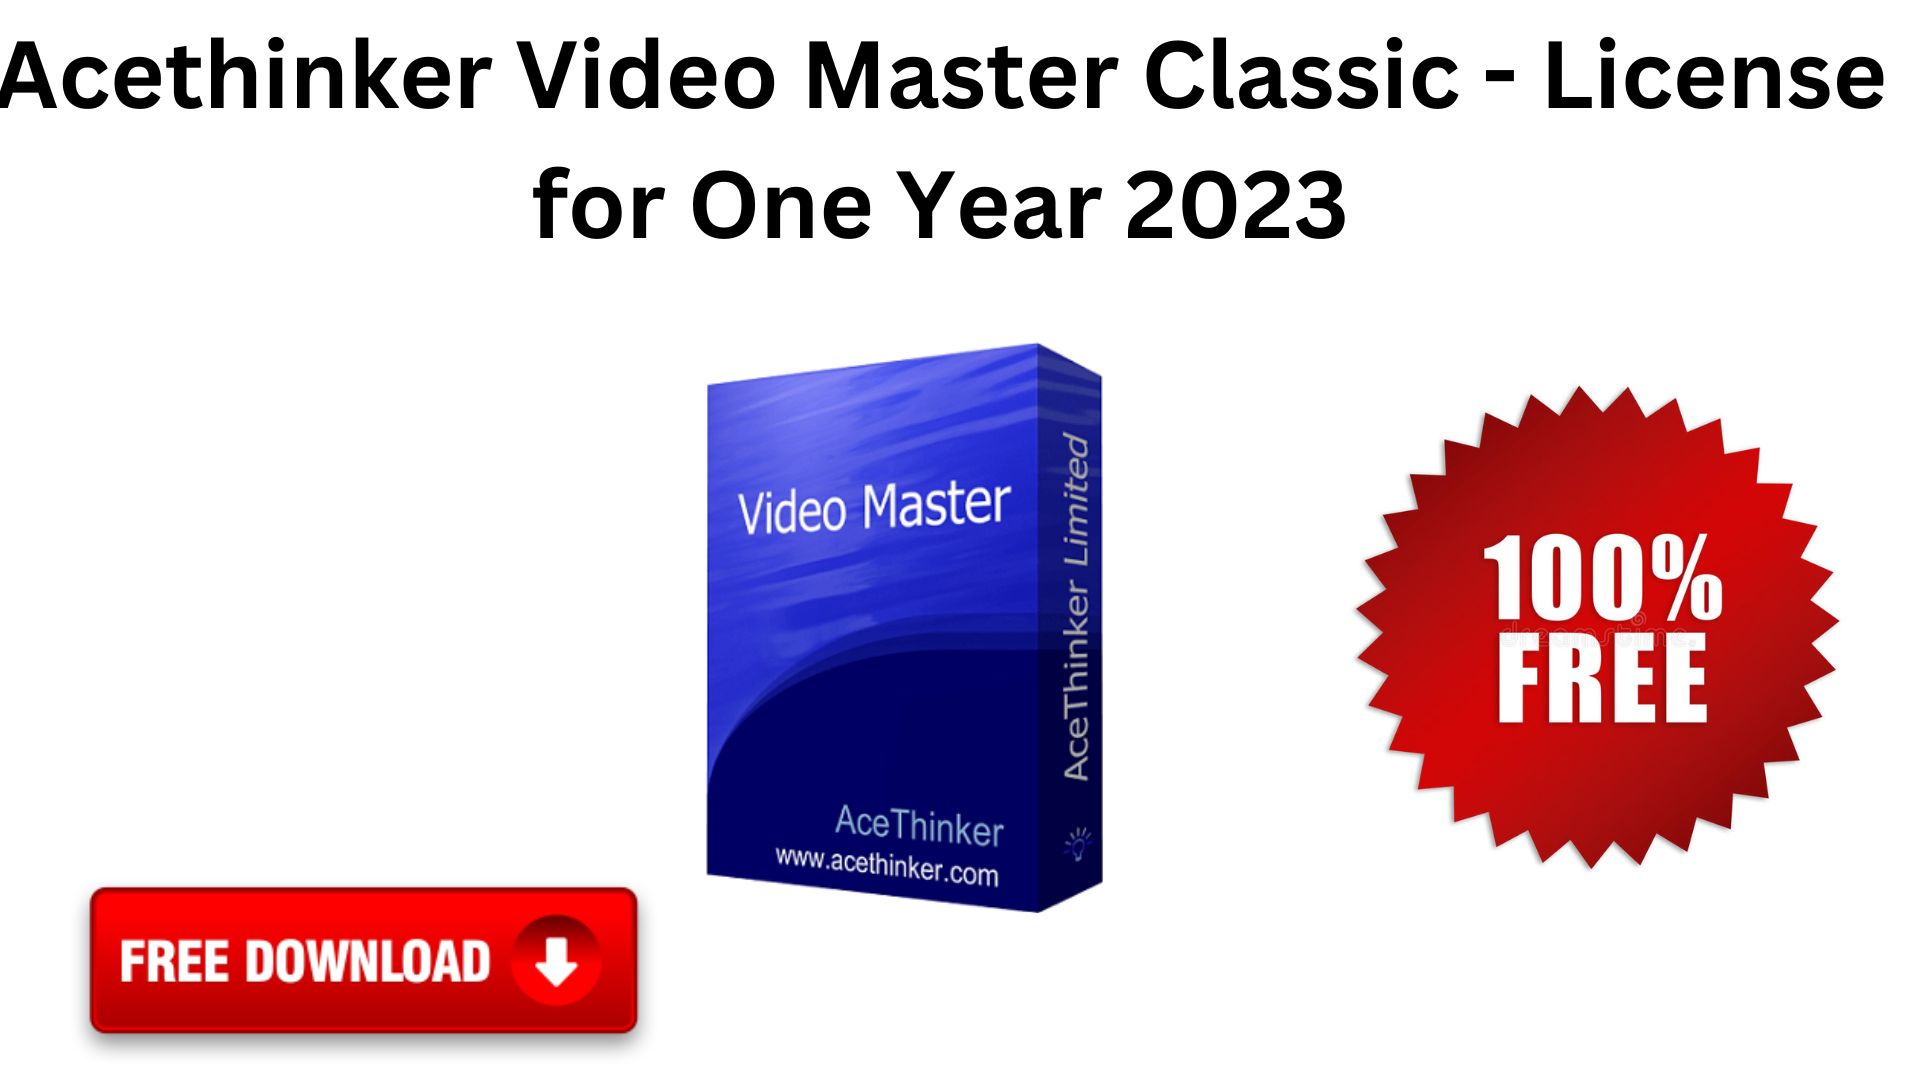 Acethinker video master classic - license for one year 2023